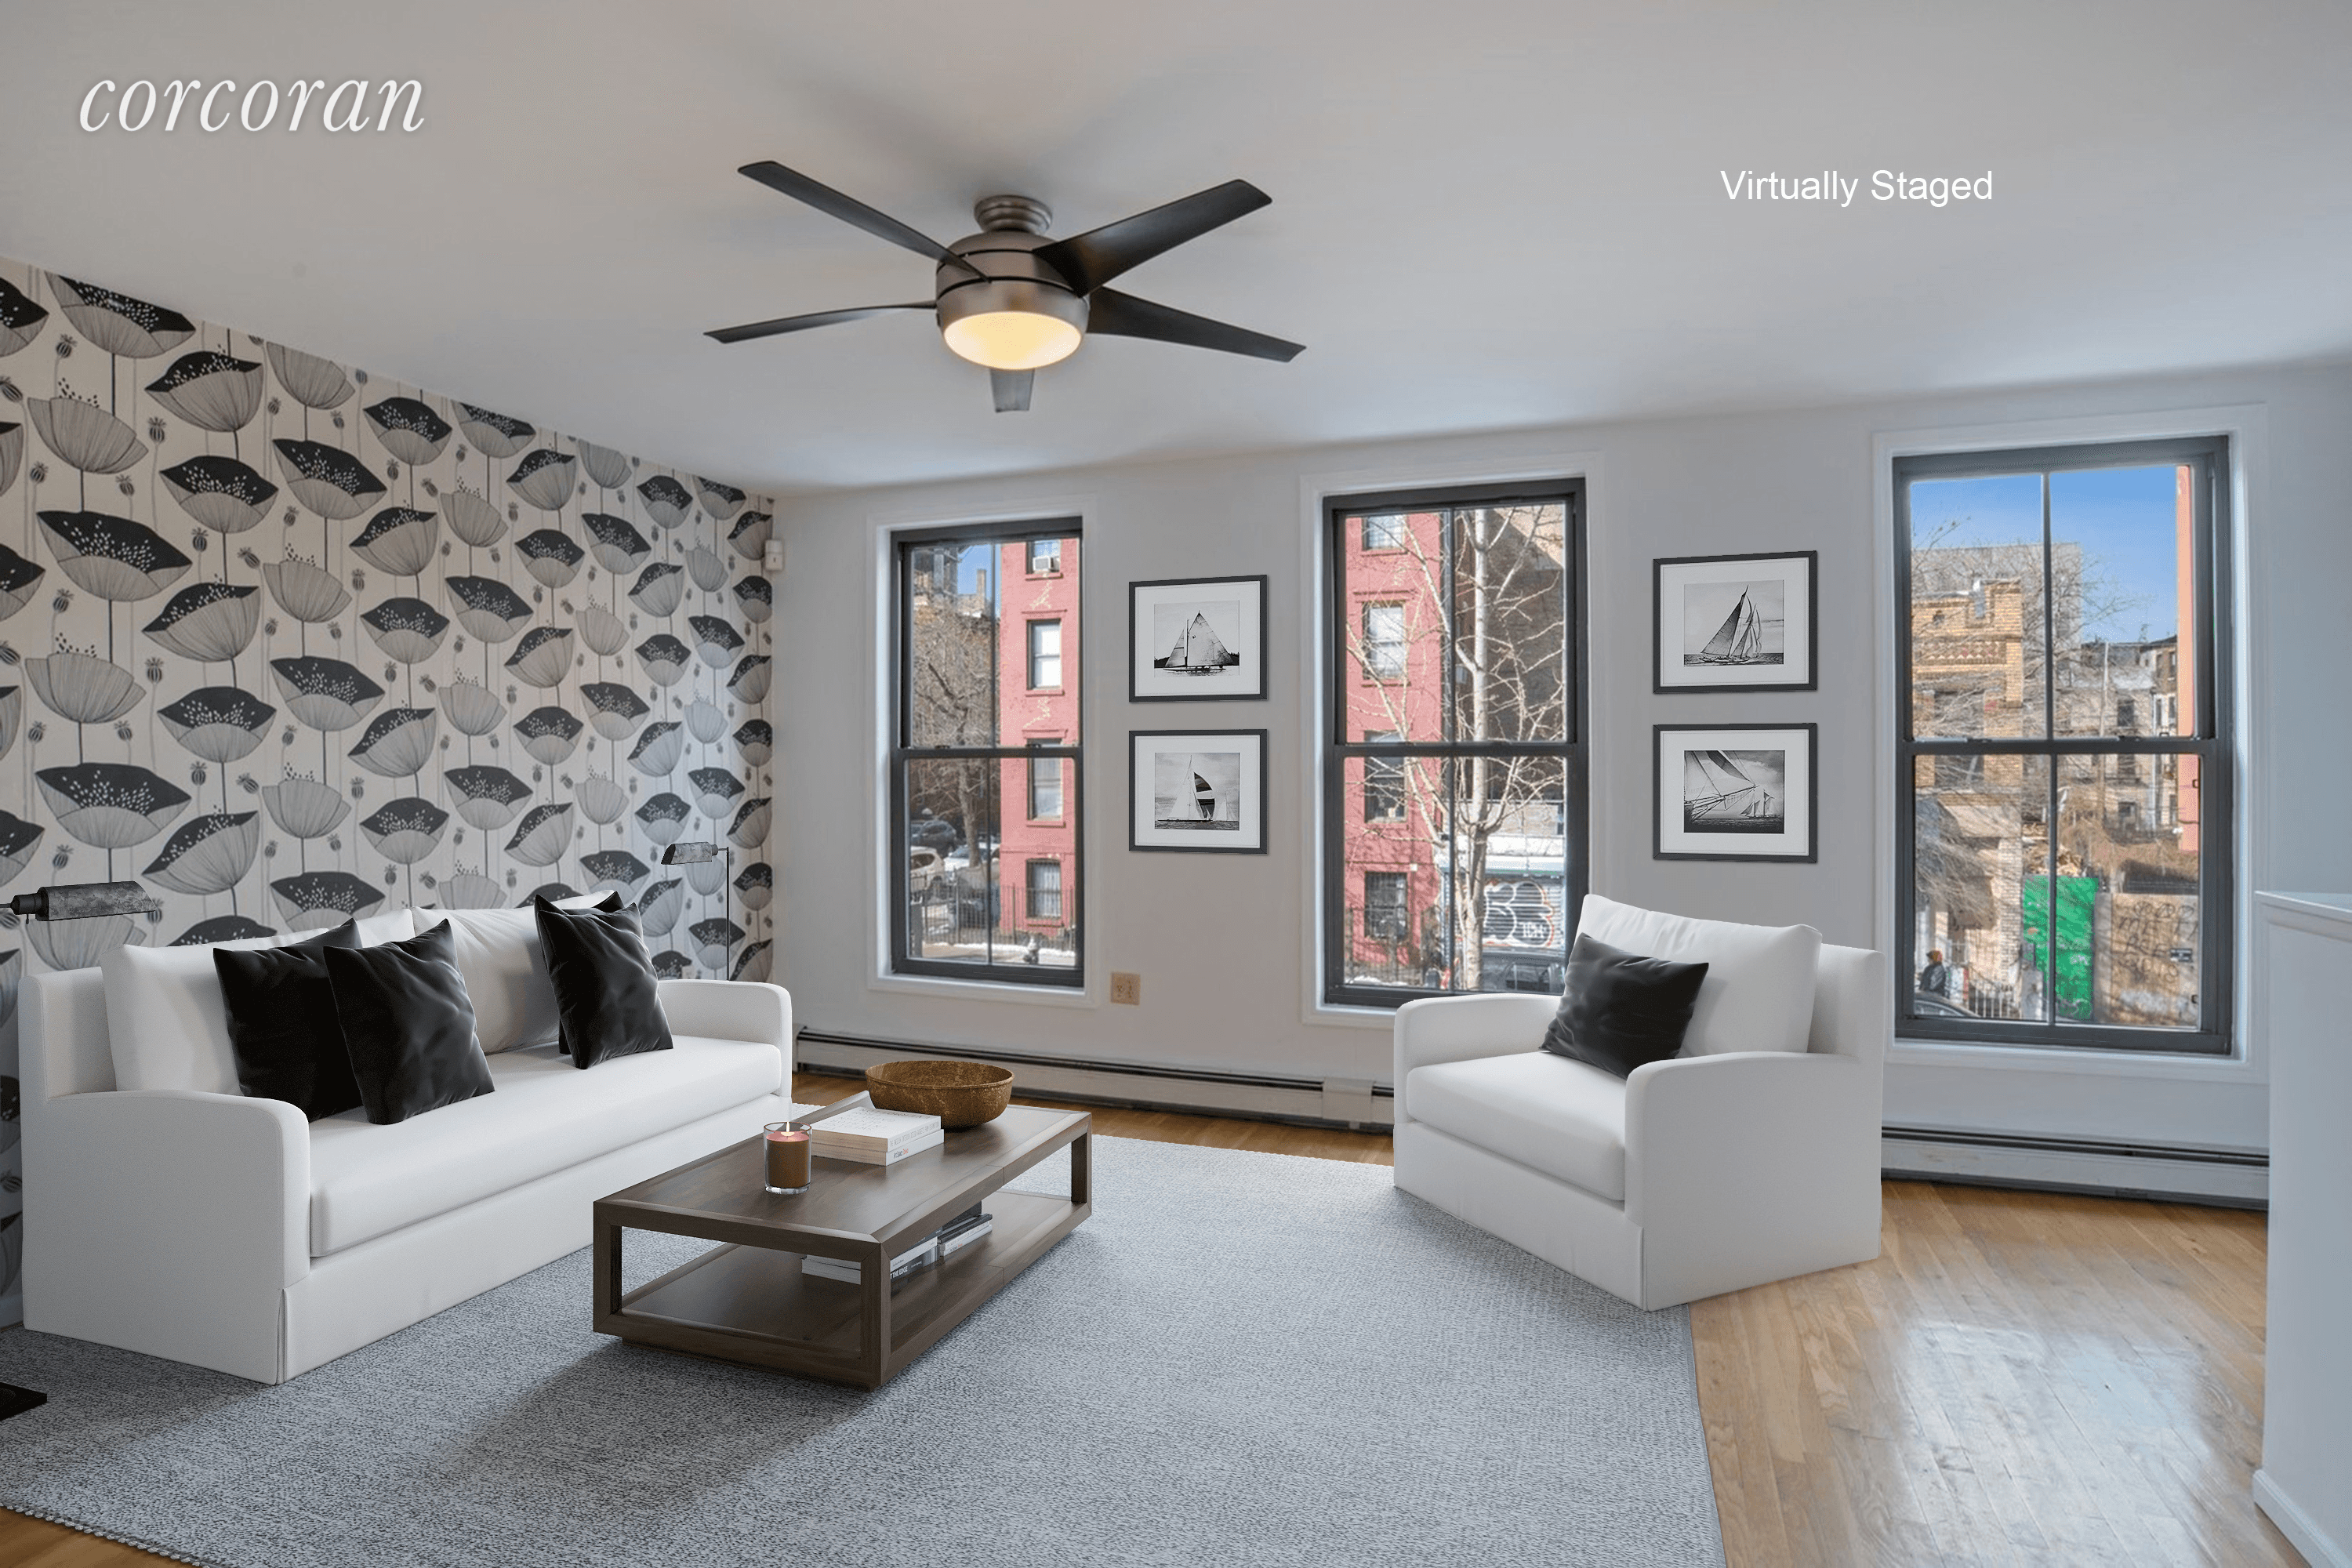 Here is an incredible Williamsburg investment opportunity 326 Keap Street is a 2 family brick townhouse with Private Parking space and huge outdoor spaces.